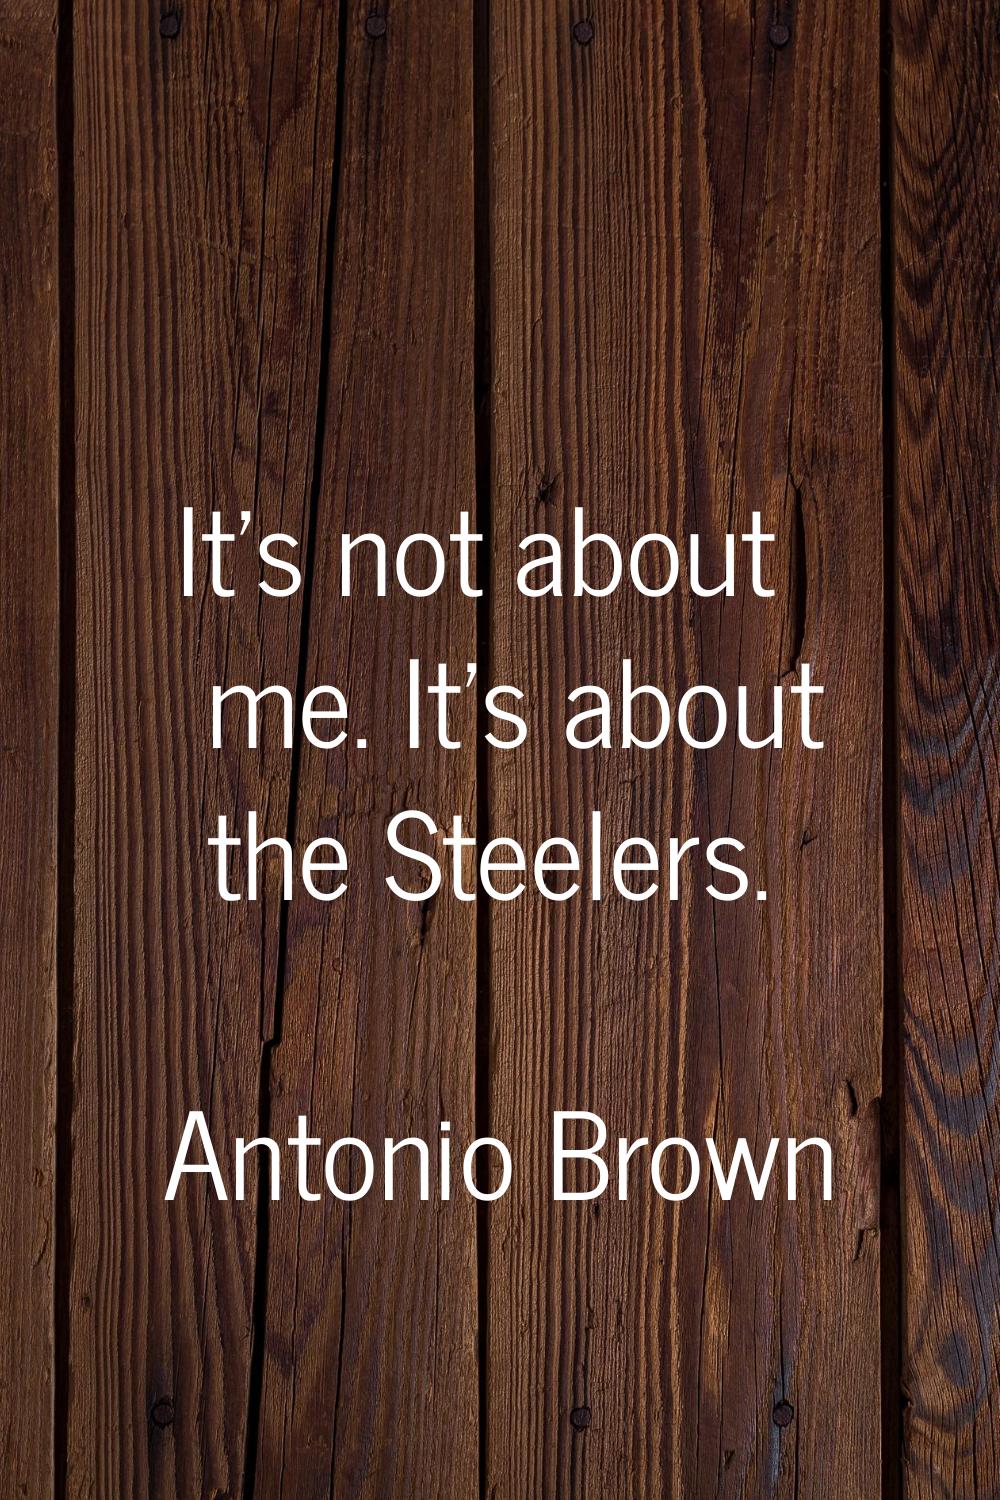 It's not about me. It's about the Steelers.